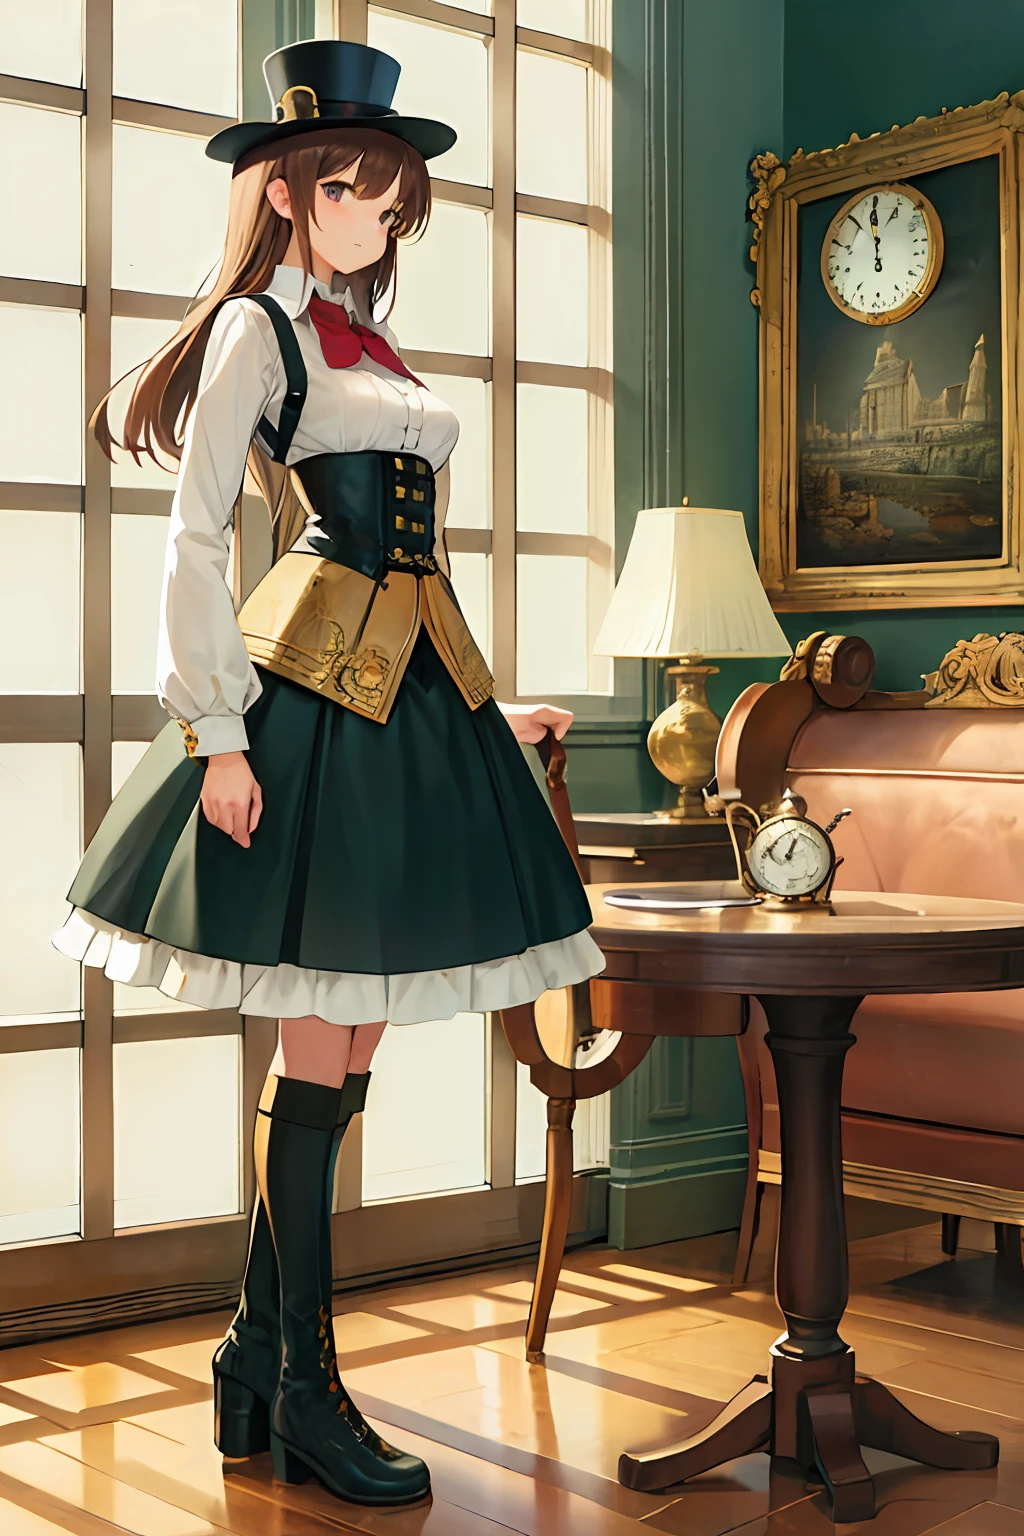 masterpiece, best quality, ultra-detailed, illustration, 1girl, solo, indoors, daytime, steampunk, clock, cafe, brown hair, top hat, goggles, corset, long skirt, boots, pocket watch, vintage, antique, brass, metal, gears, machinery, clockwork, clock tower, ornate, elegant, classic, sophisticated, refined, poised, contemplative, thoughtful, curious, mysterious, enigmatic, watchful, intelligent, bookish, coffee, cake, pastry, teapot, cup, saucer, table, chair, wallpaper, chandelier, window, sunlight, shadow, contrast, perspective, depth, texture, detail, realism, impressionistic, expressionistic, abstract, surrealistic, innovative, experimental, unique, atmosphere, ambiance, mood, nostalgia, historical, cultural, technological, industrial, fantasy, imagination, creativity, artistry, craftsmanship, skill, precision, detail, composition, balance, harmony, rhythm, color, light, shadow, reflection, refraction, tone, contrast, foreground, middle ground, background, vanishing point, horizon line, focal point, naturalistic, figurative, representational.